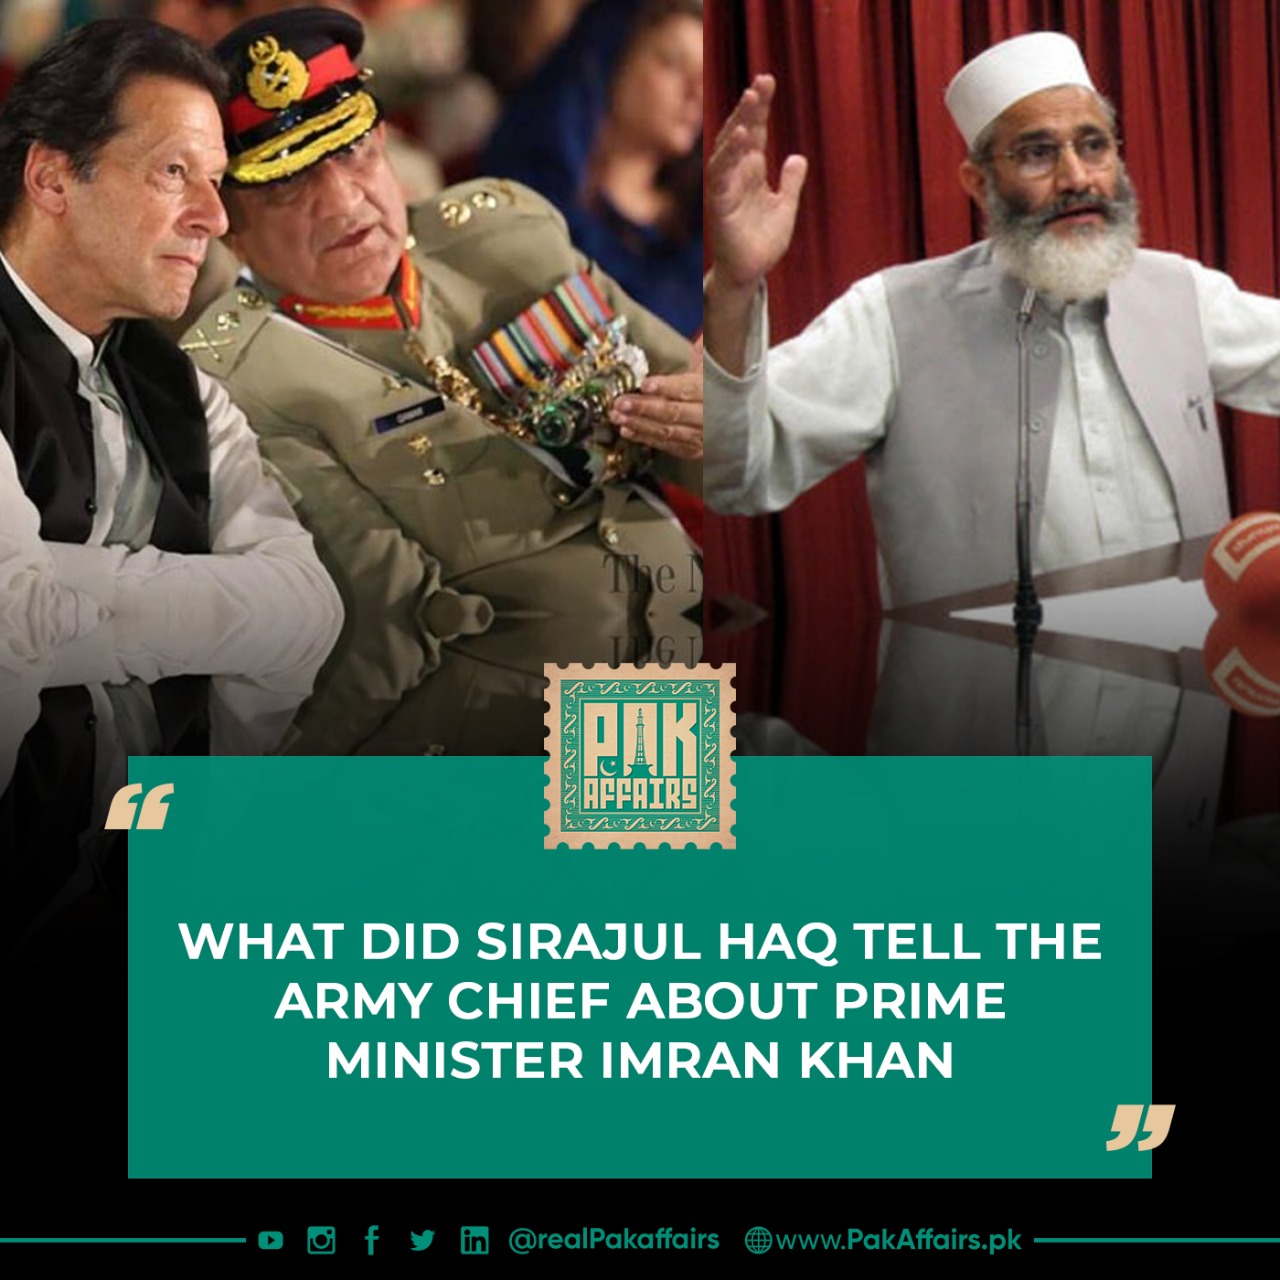 What did Sirajul Haq tell the Army Chief about Prime Minister Imran Khan?